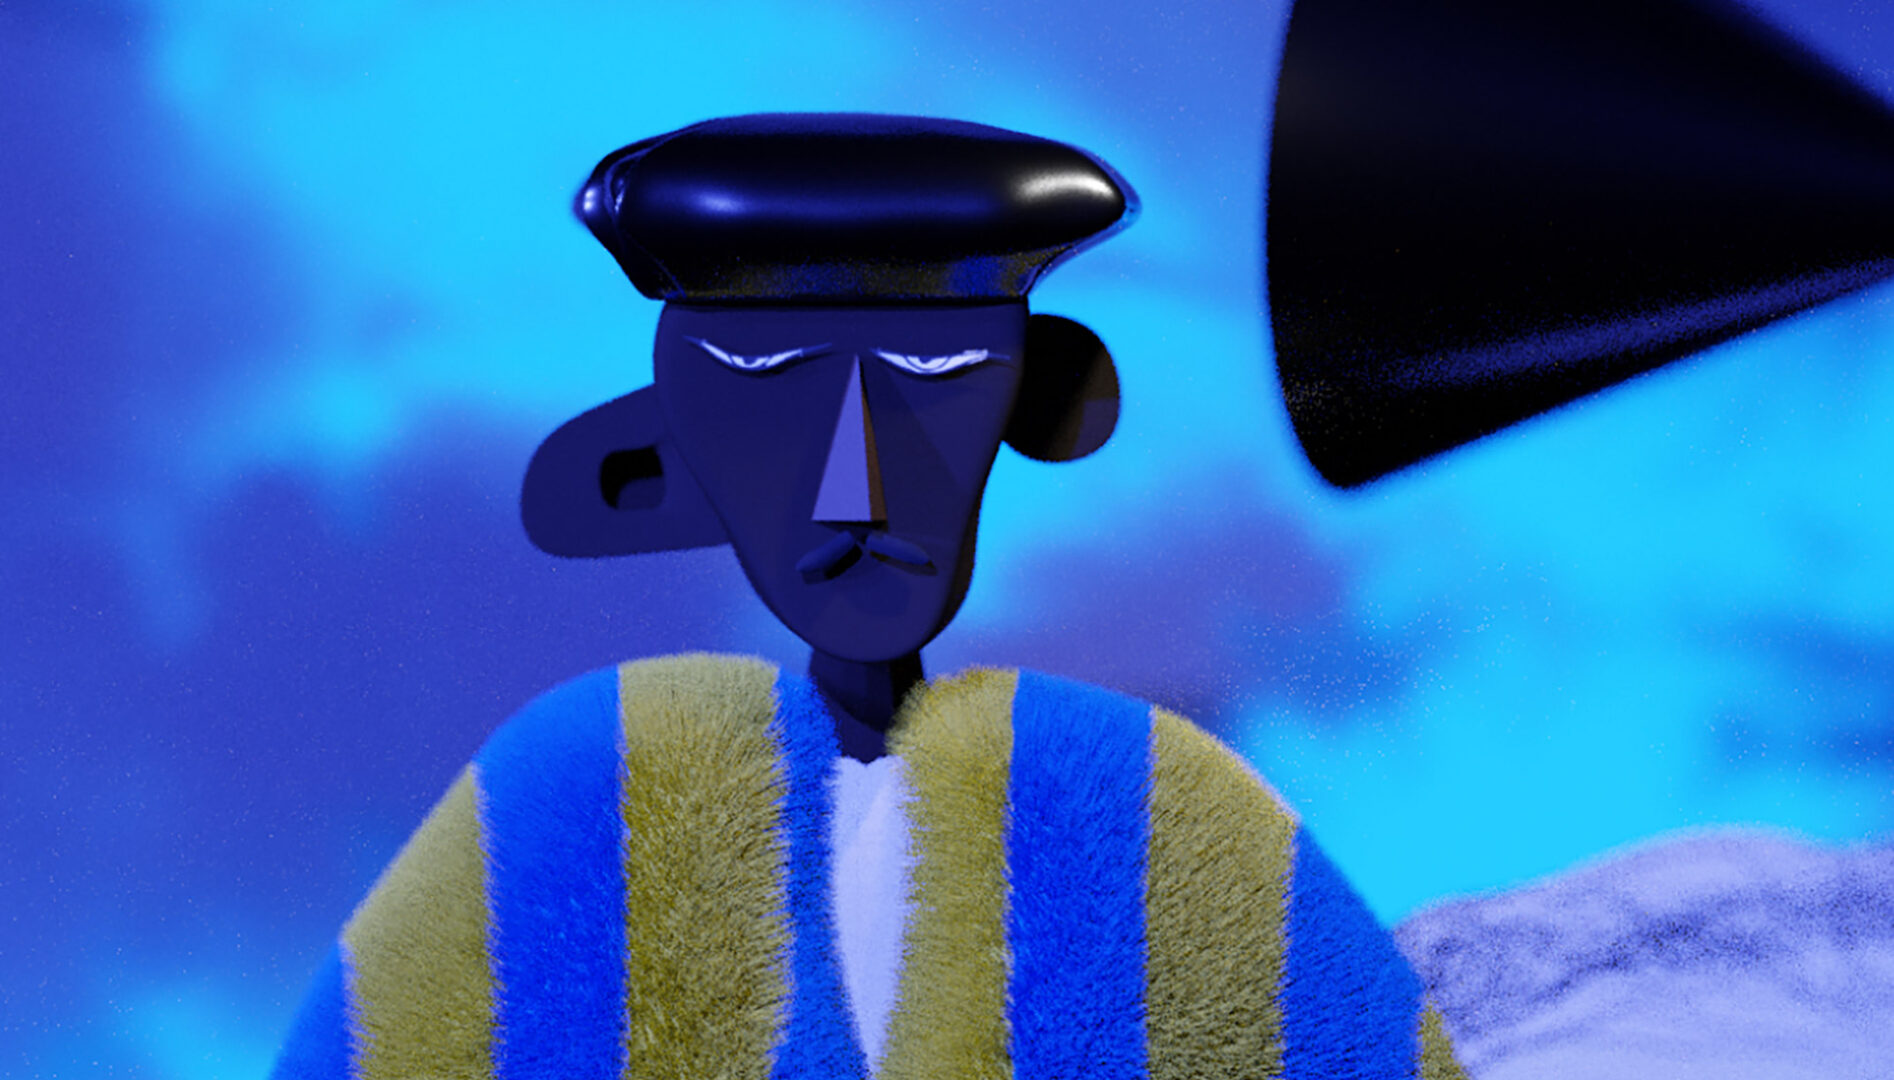 A 3D model dressed in a striped shirt and a black hat.